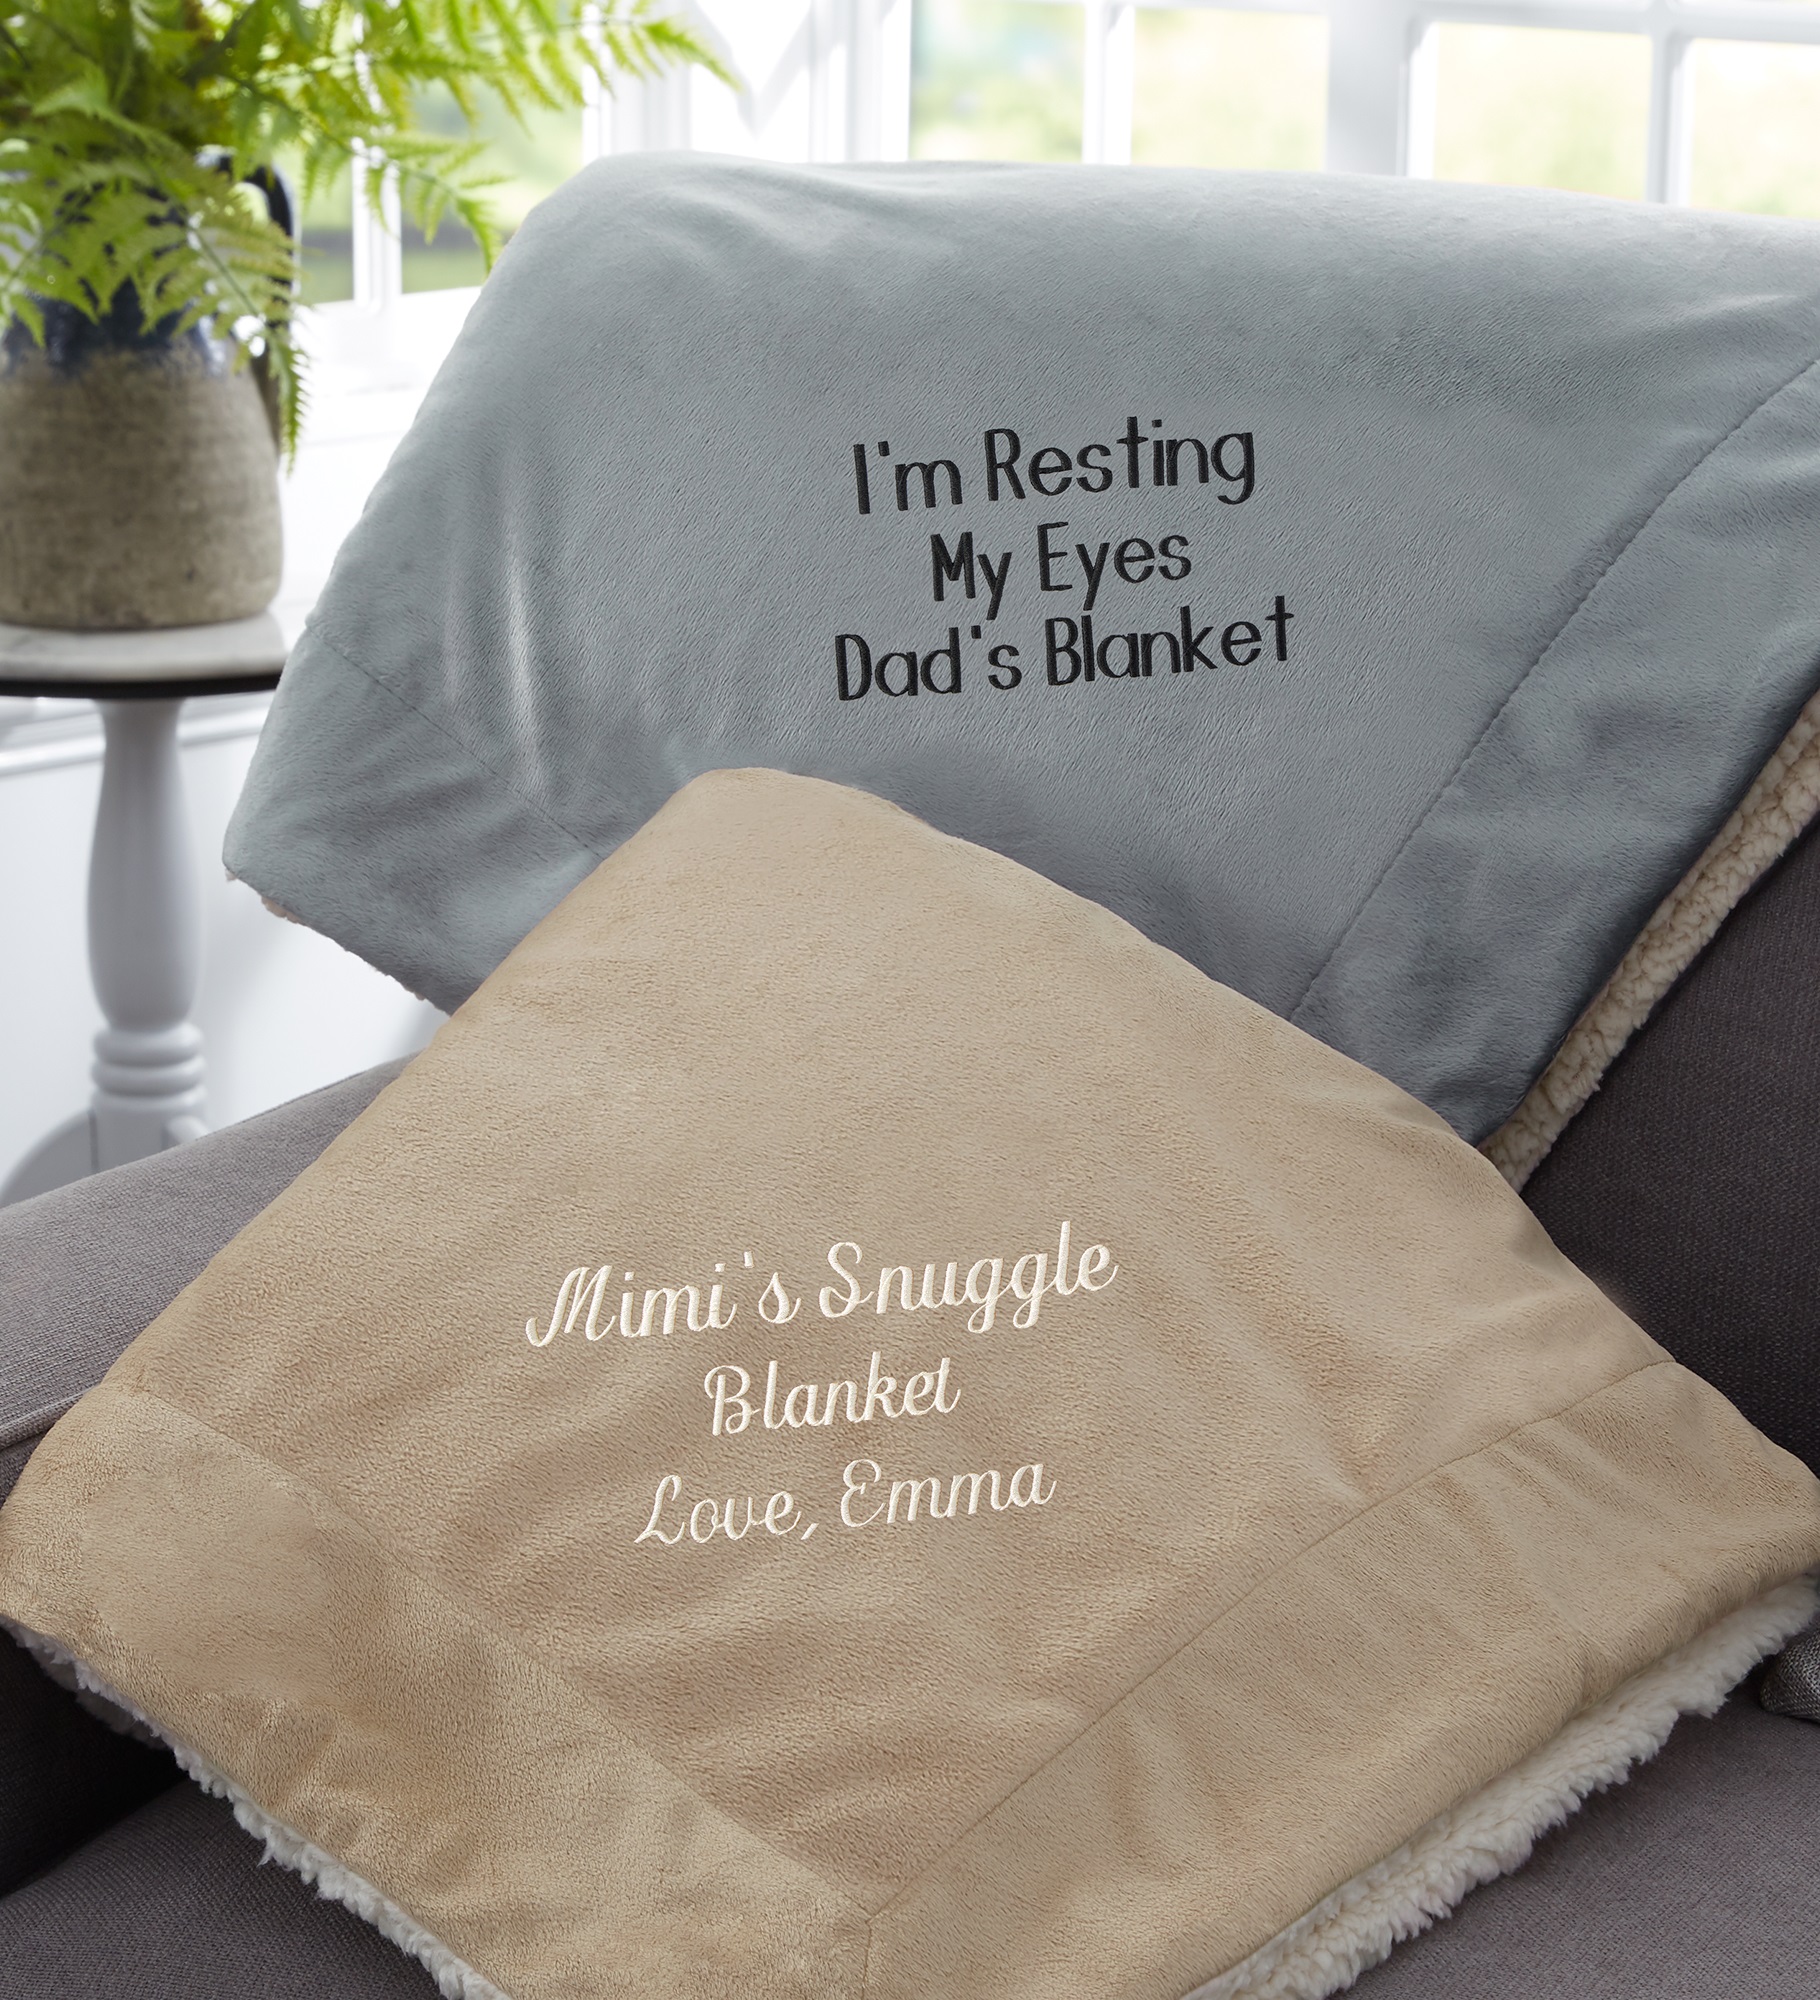 You Name it! Embroidered Sherpa Blanket